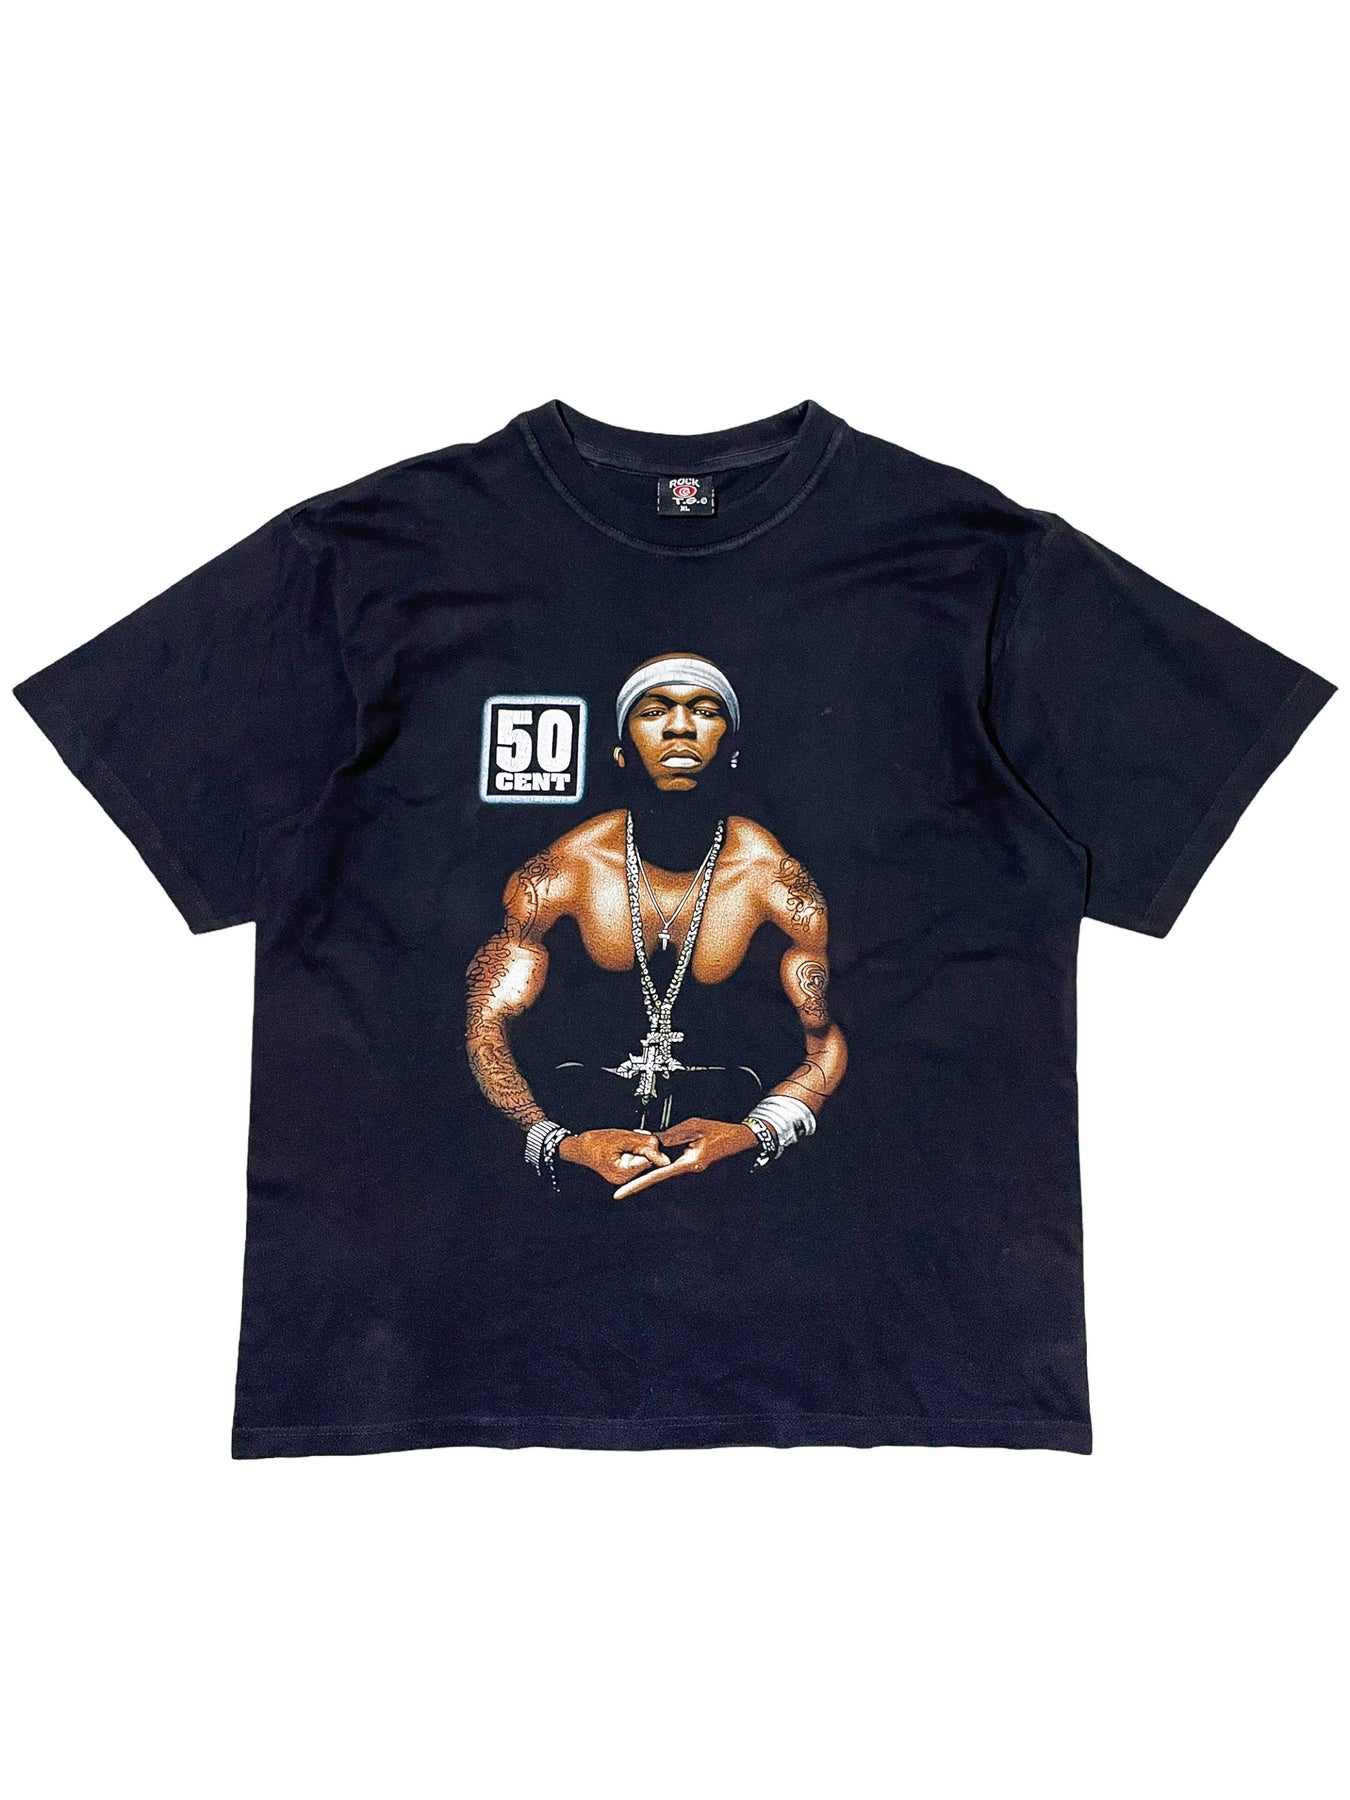 For Everything 50 Cent and G-Unit – G-Unit Brands, Inc.